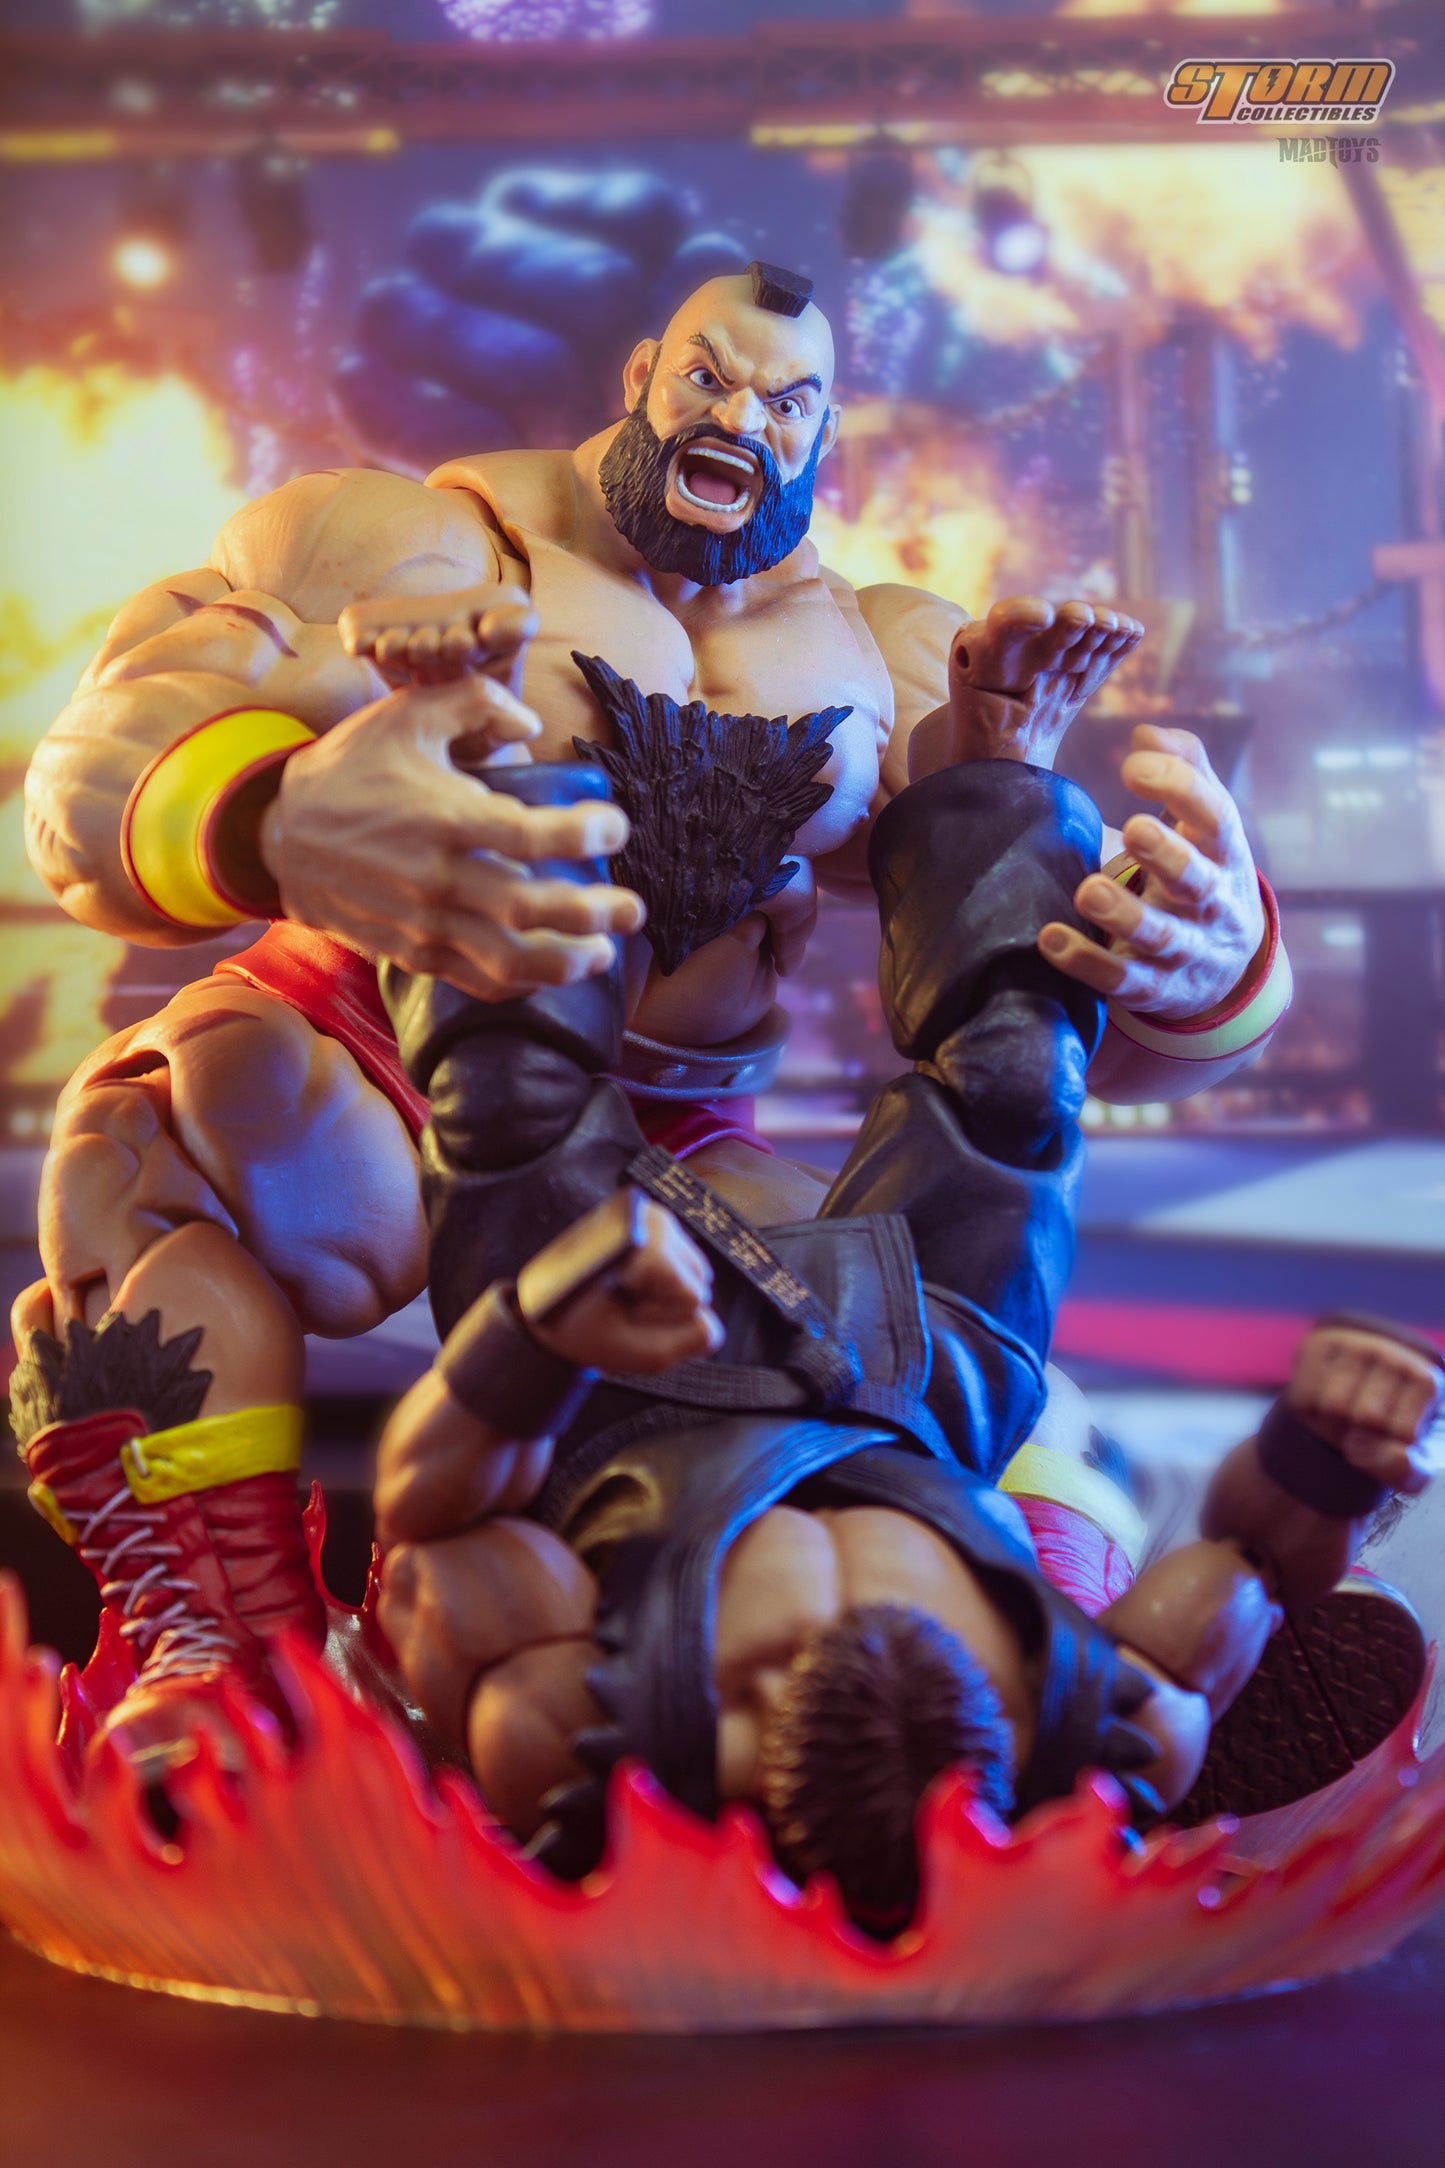 Storm Toys Zangief Cloak for 1/10 Figures